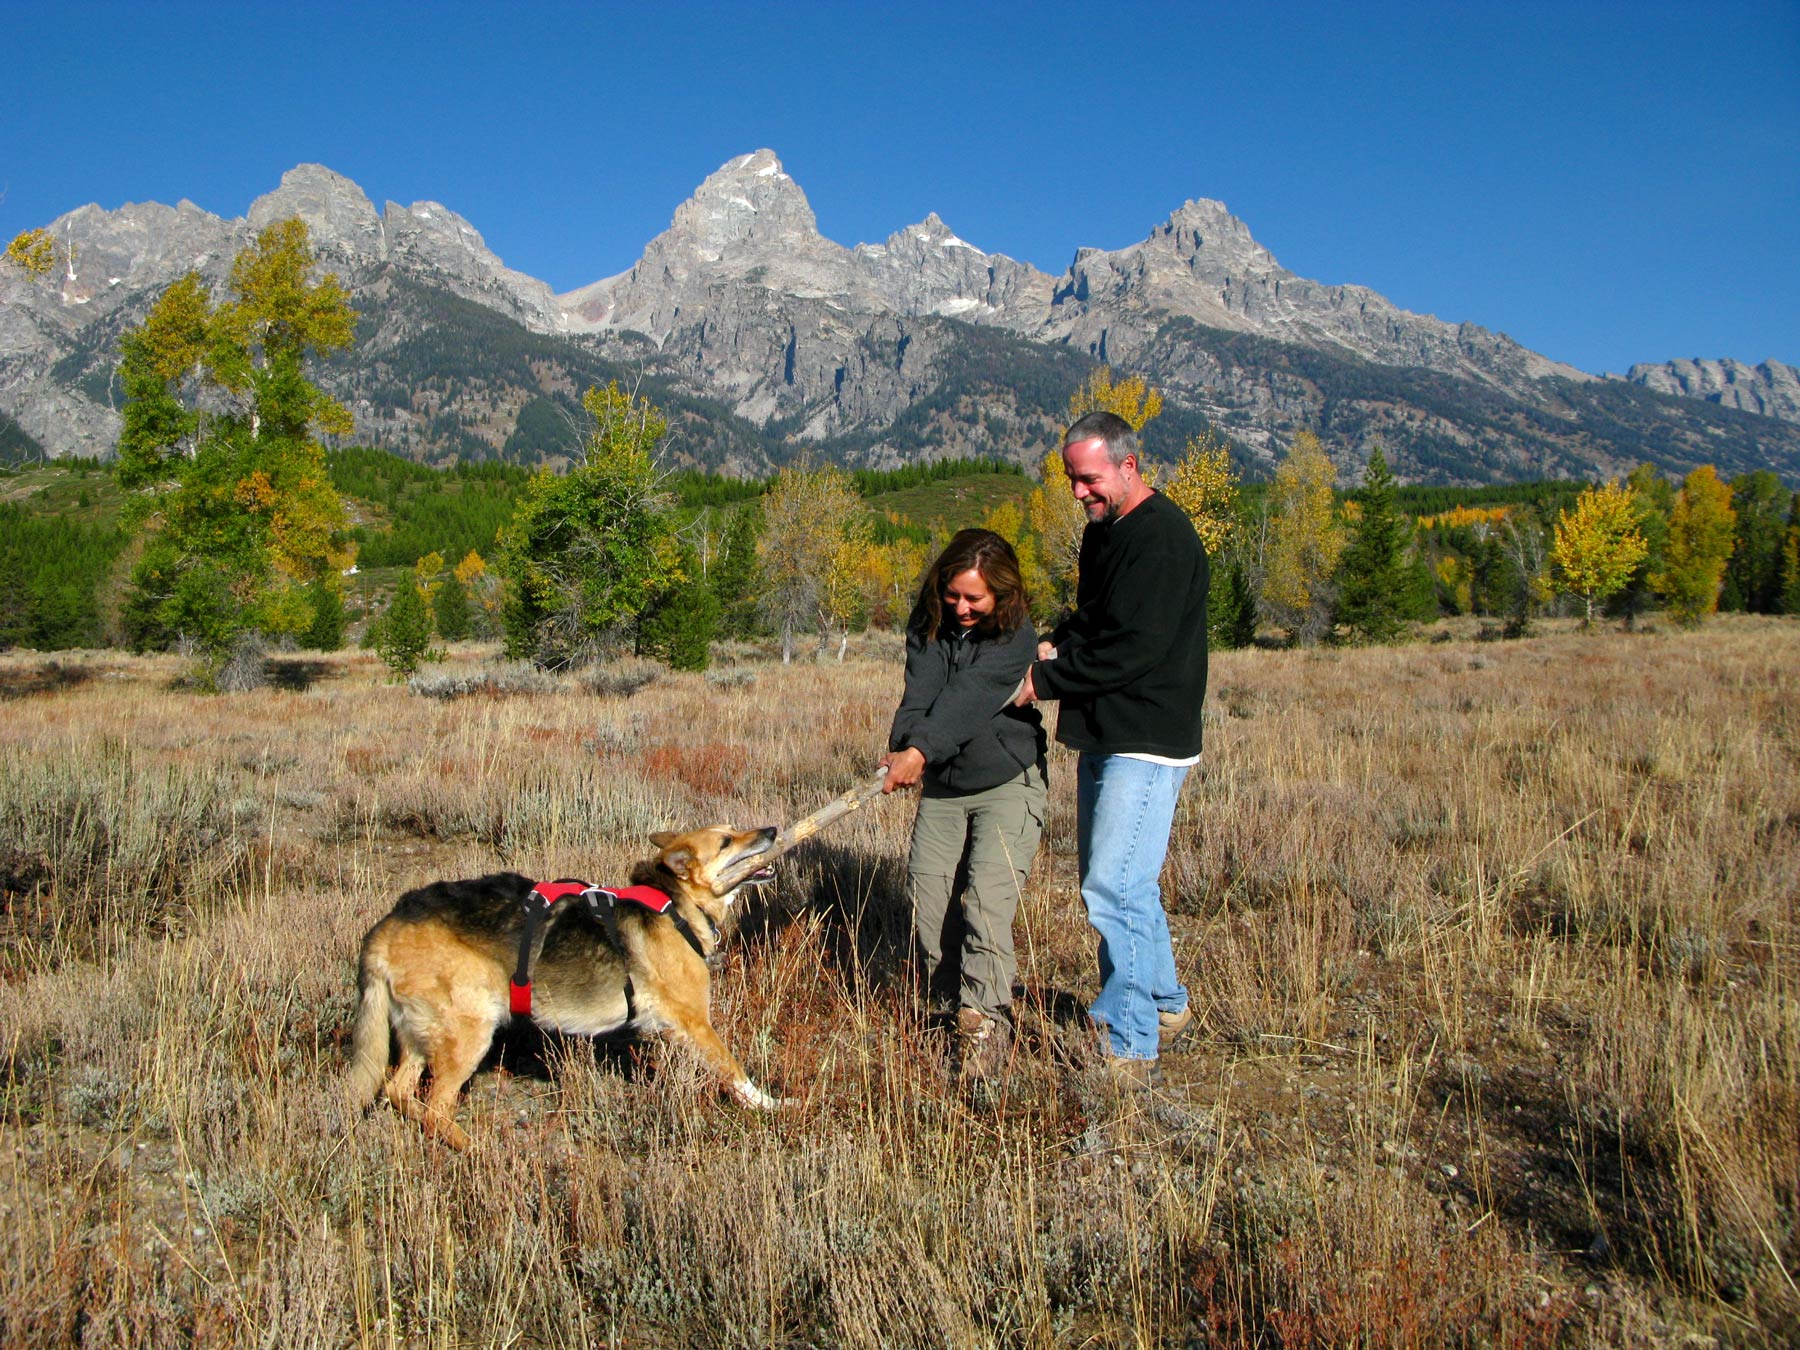 Jerry at the Grand Tetons